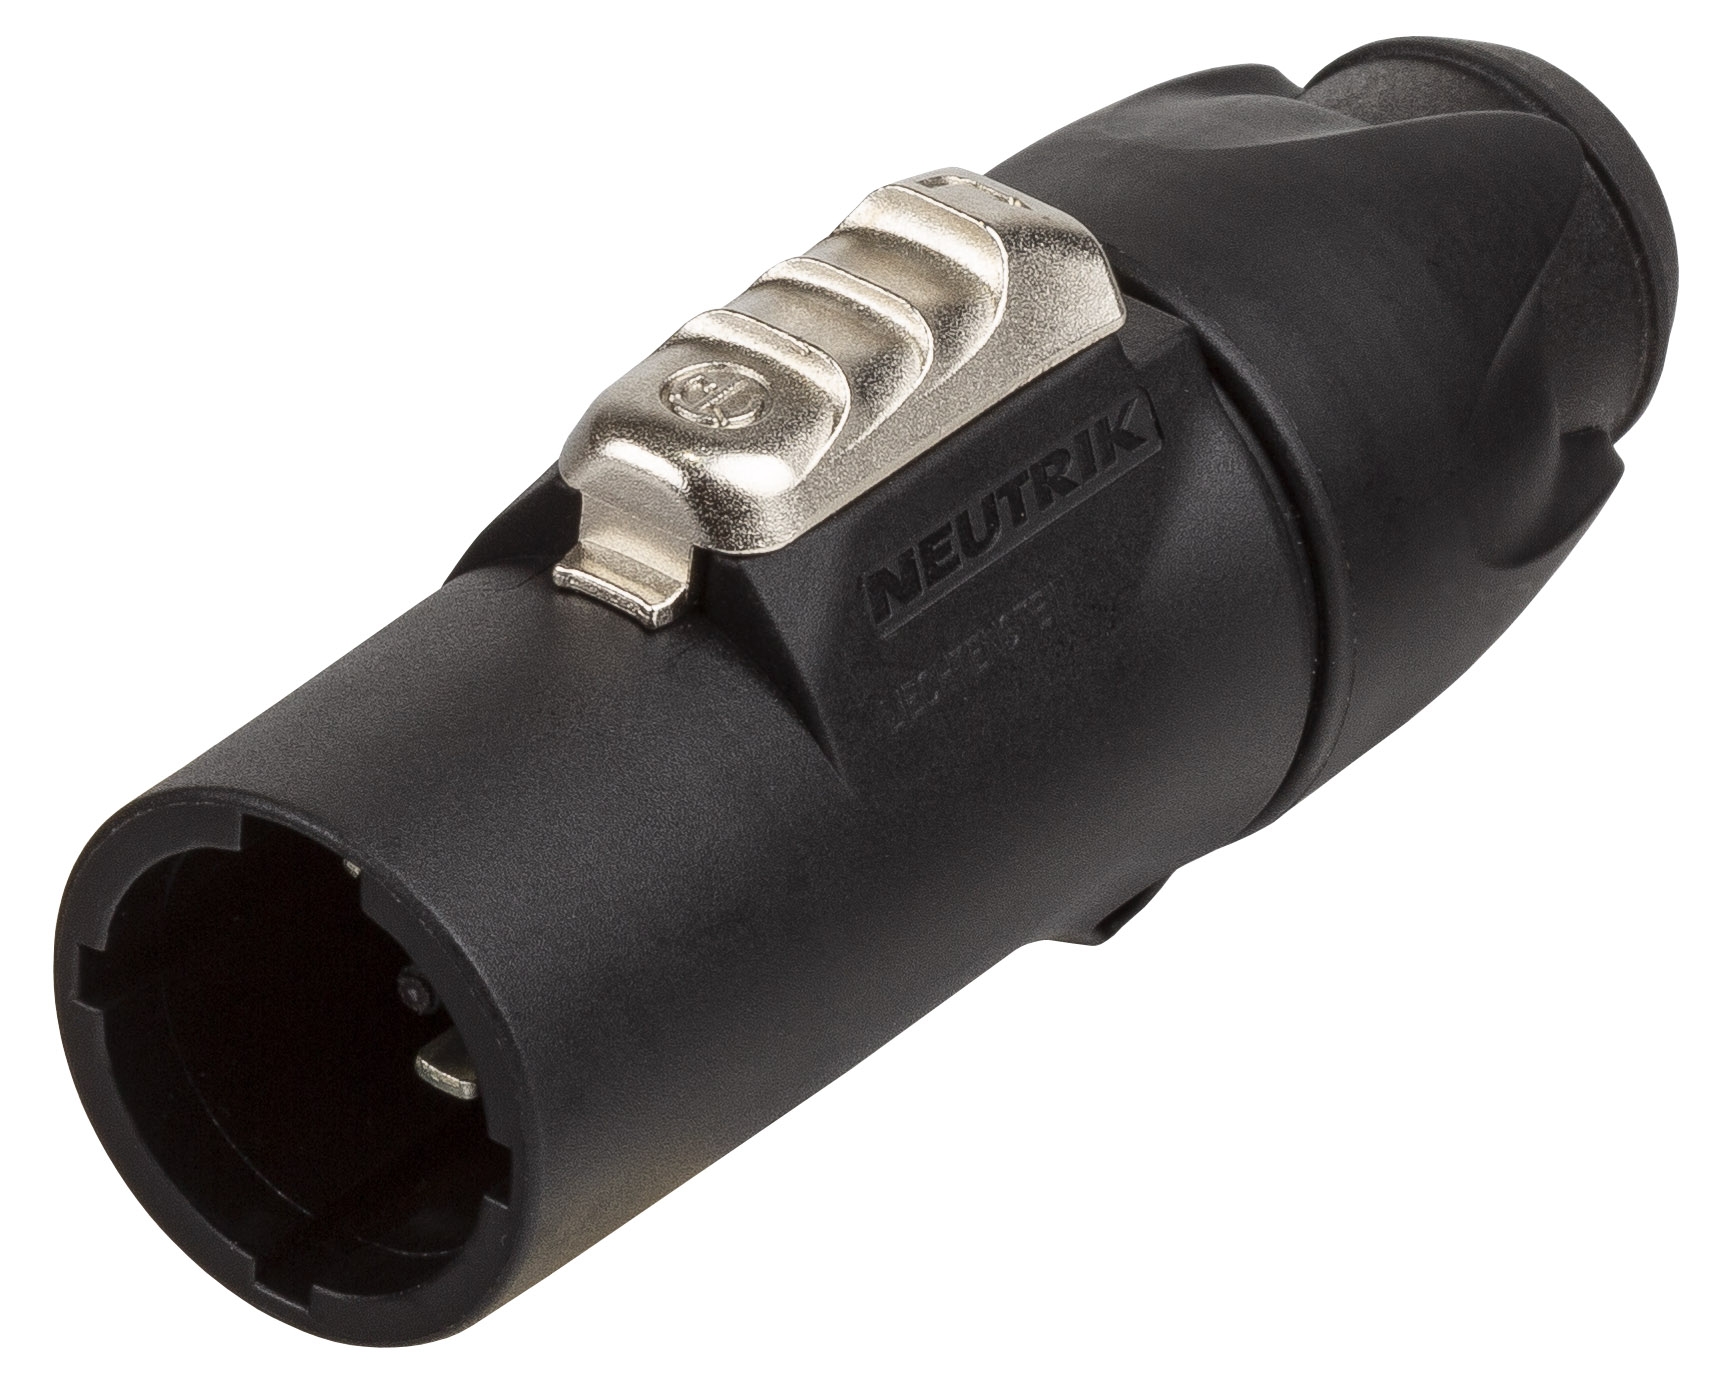 Neutrik PowerCON TRUE1 locking male cable connector with power-out and screw terminals for outdoor applications.